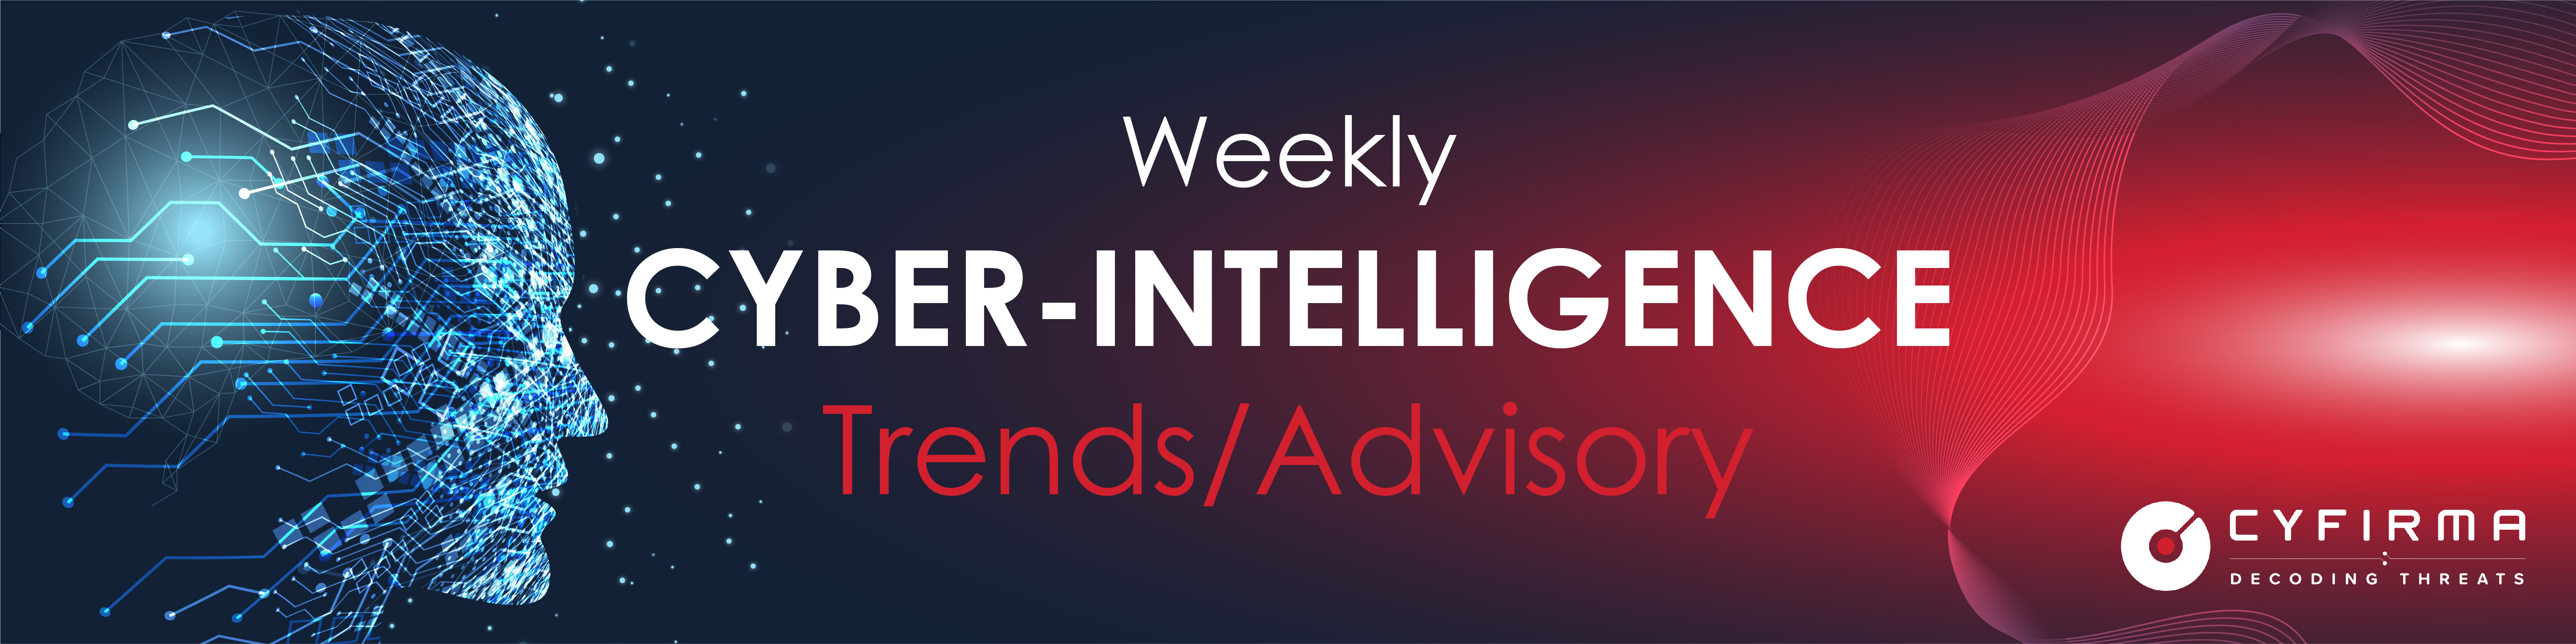 Weekly Cyber-Intelligence Report – 16 May 2021